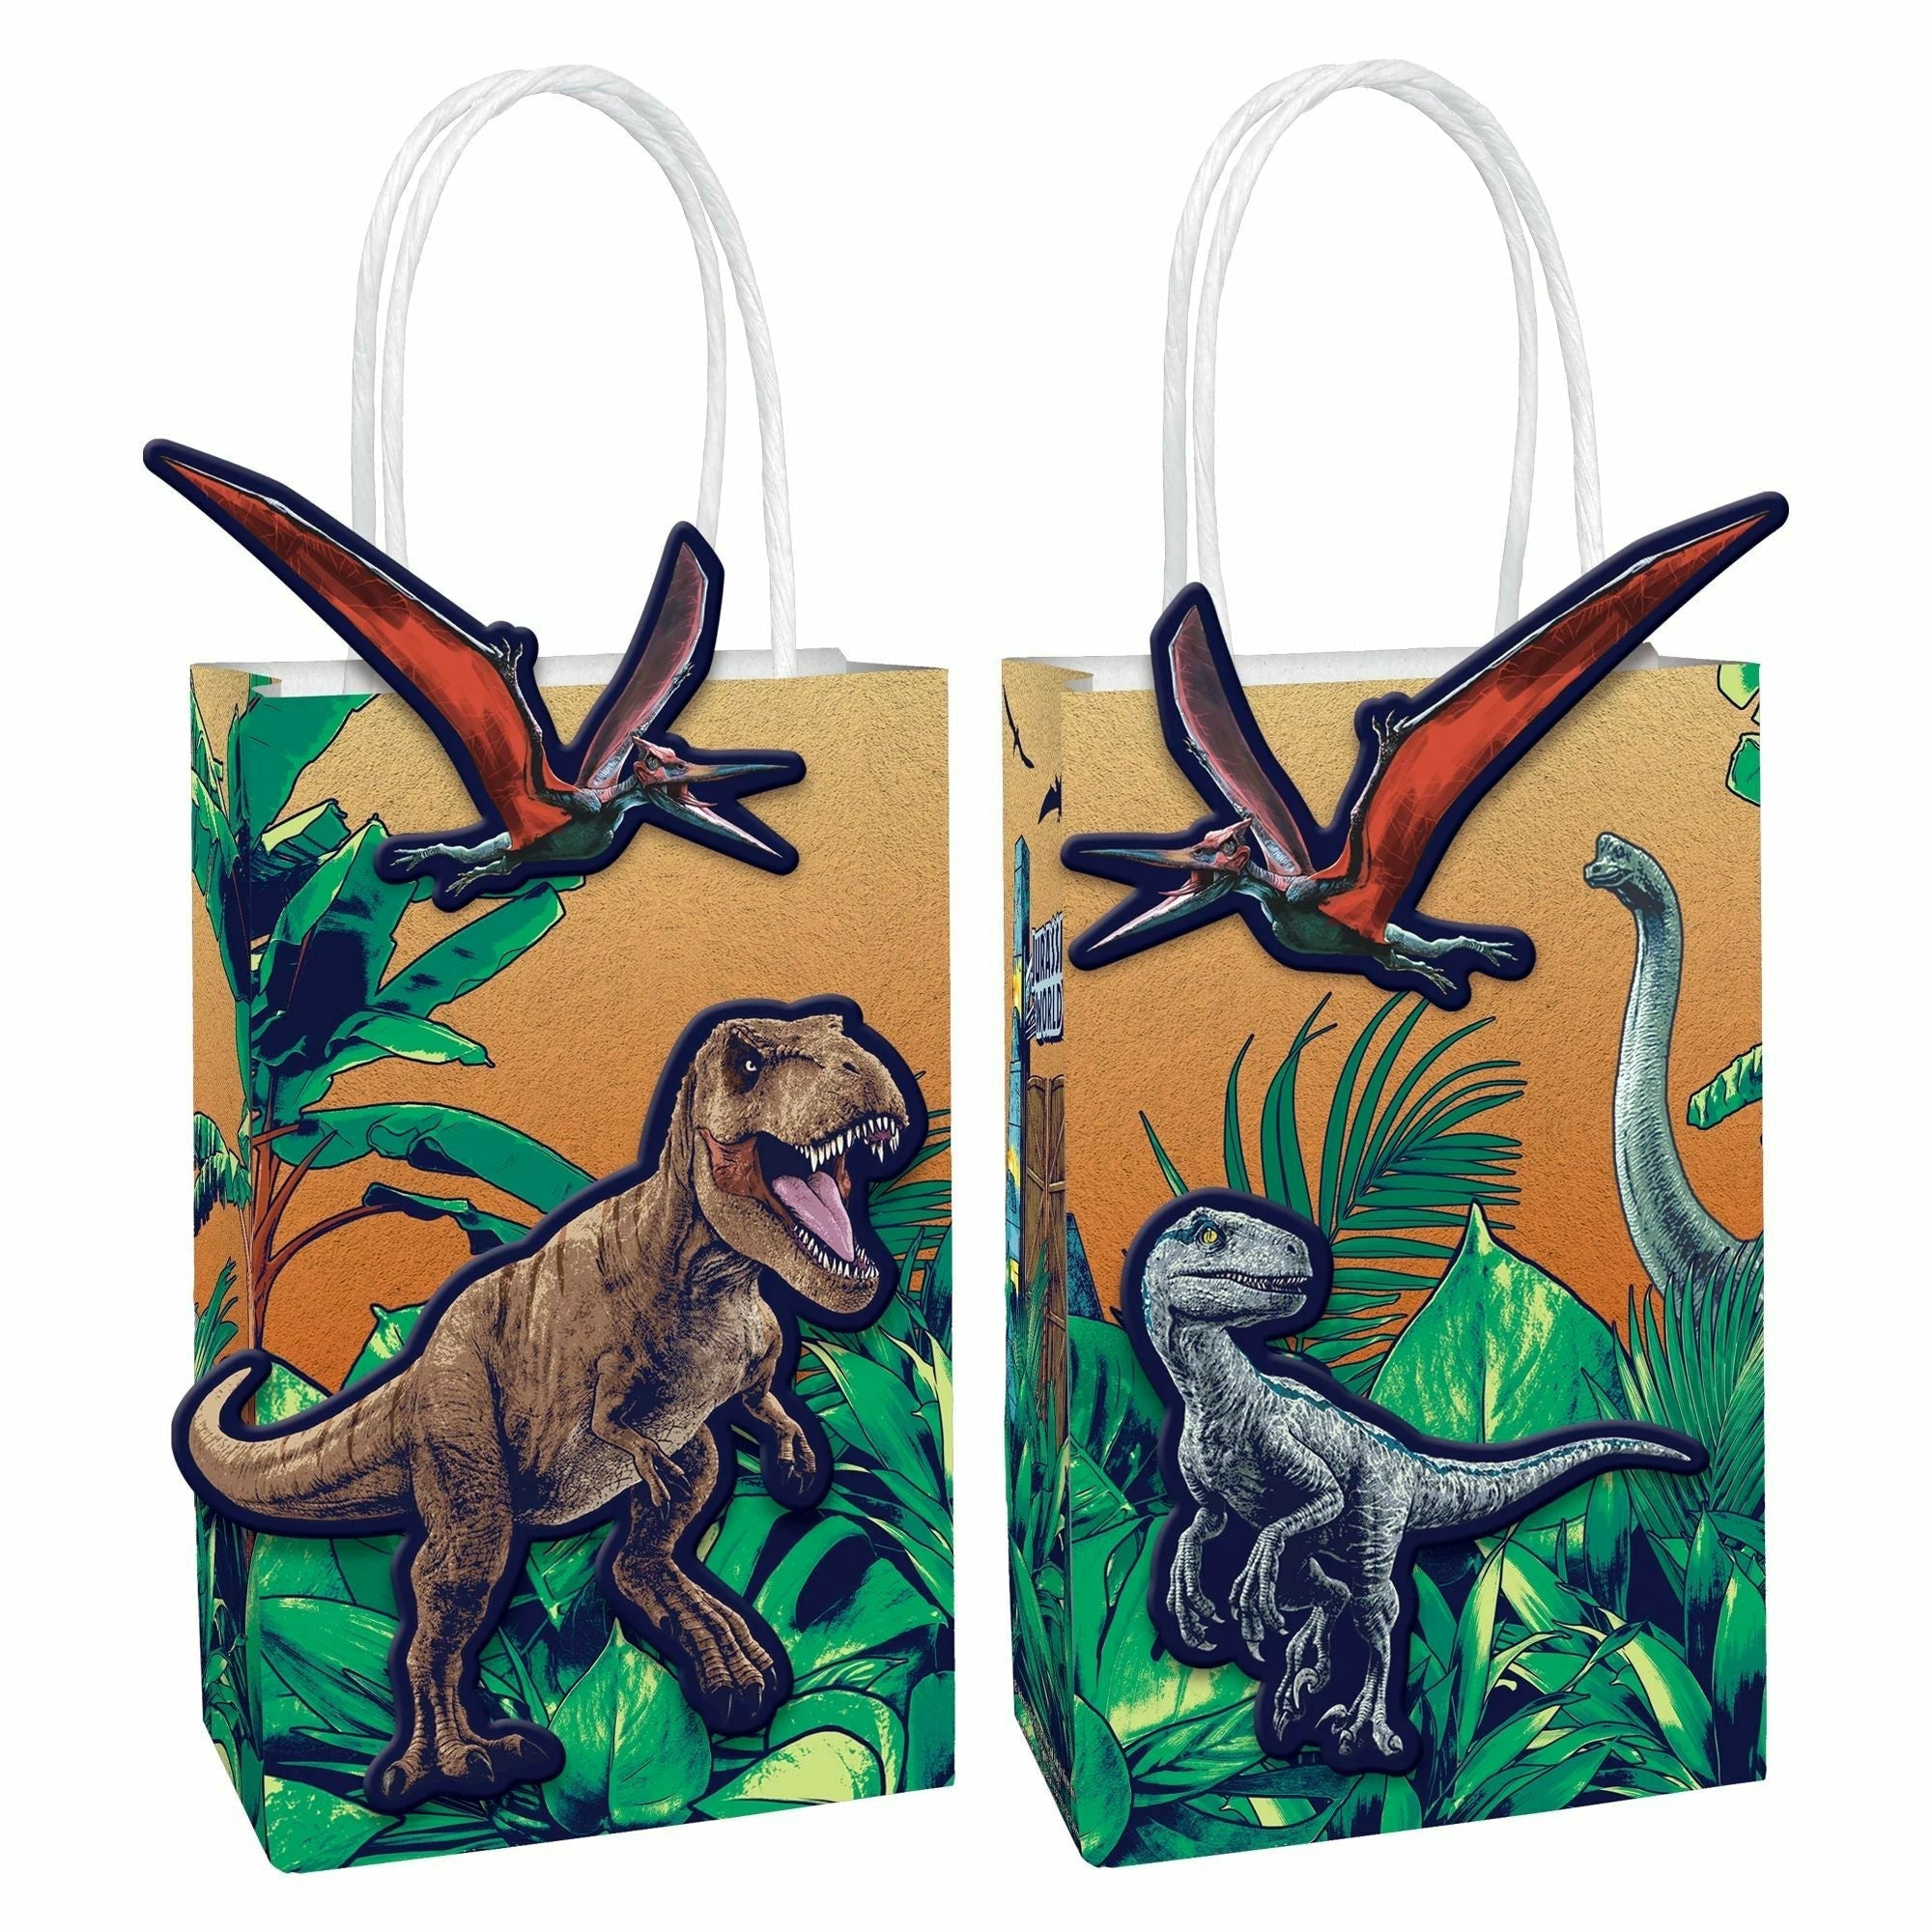 Amscan BIRTHDAY: JUVENILE Jurassic World Into the Wild Create Your Own Bags